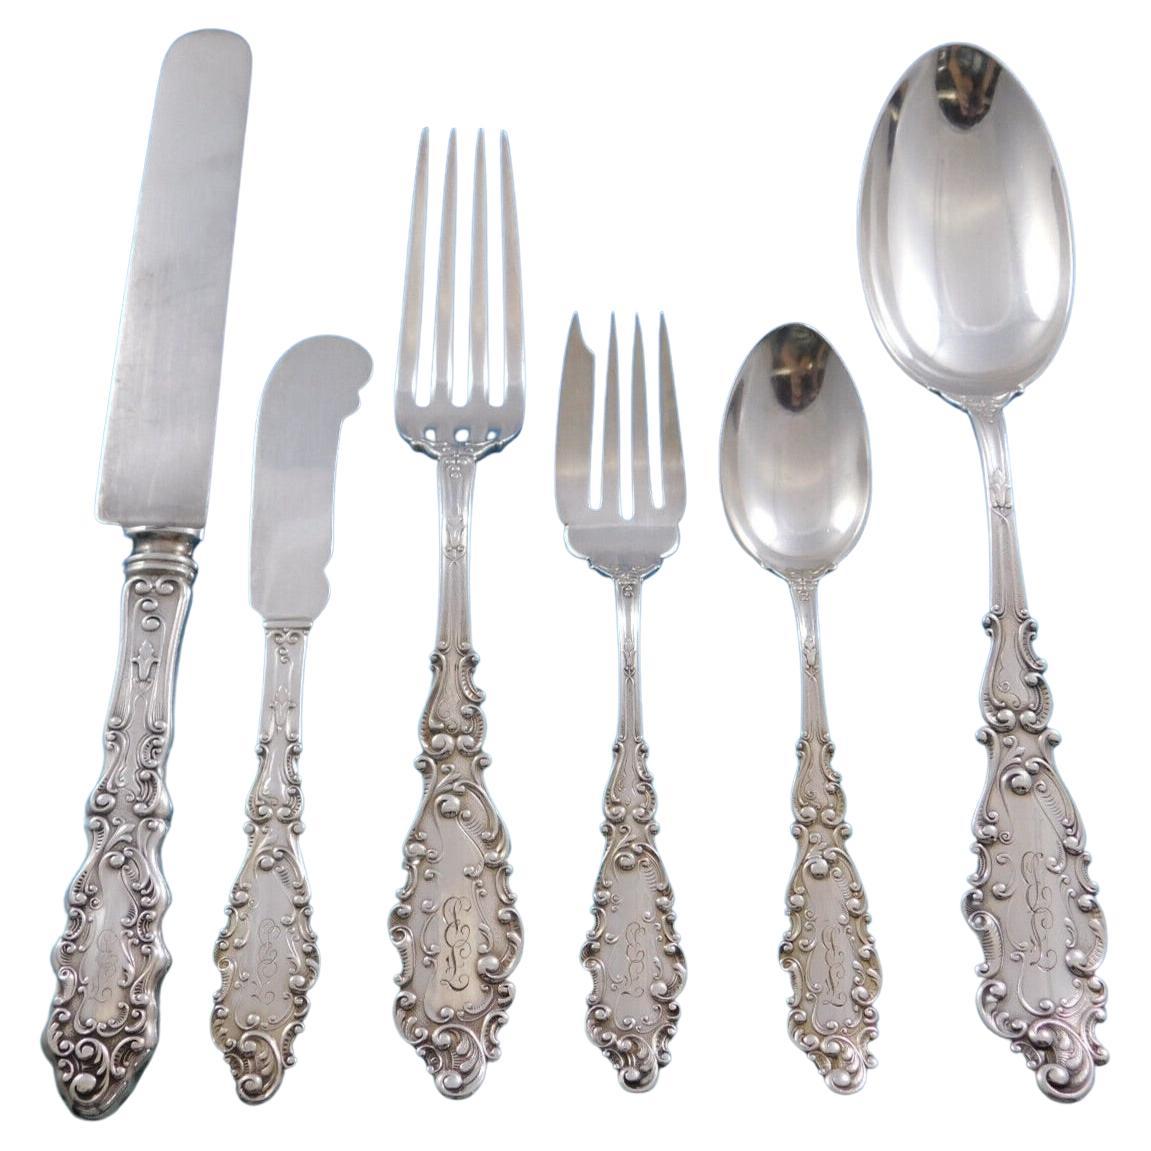 Luxembourg by Gorham Sterling Silver Flatware Set 8 Service 48 Pcs Dinner